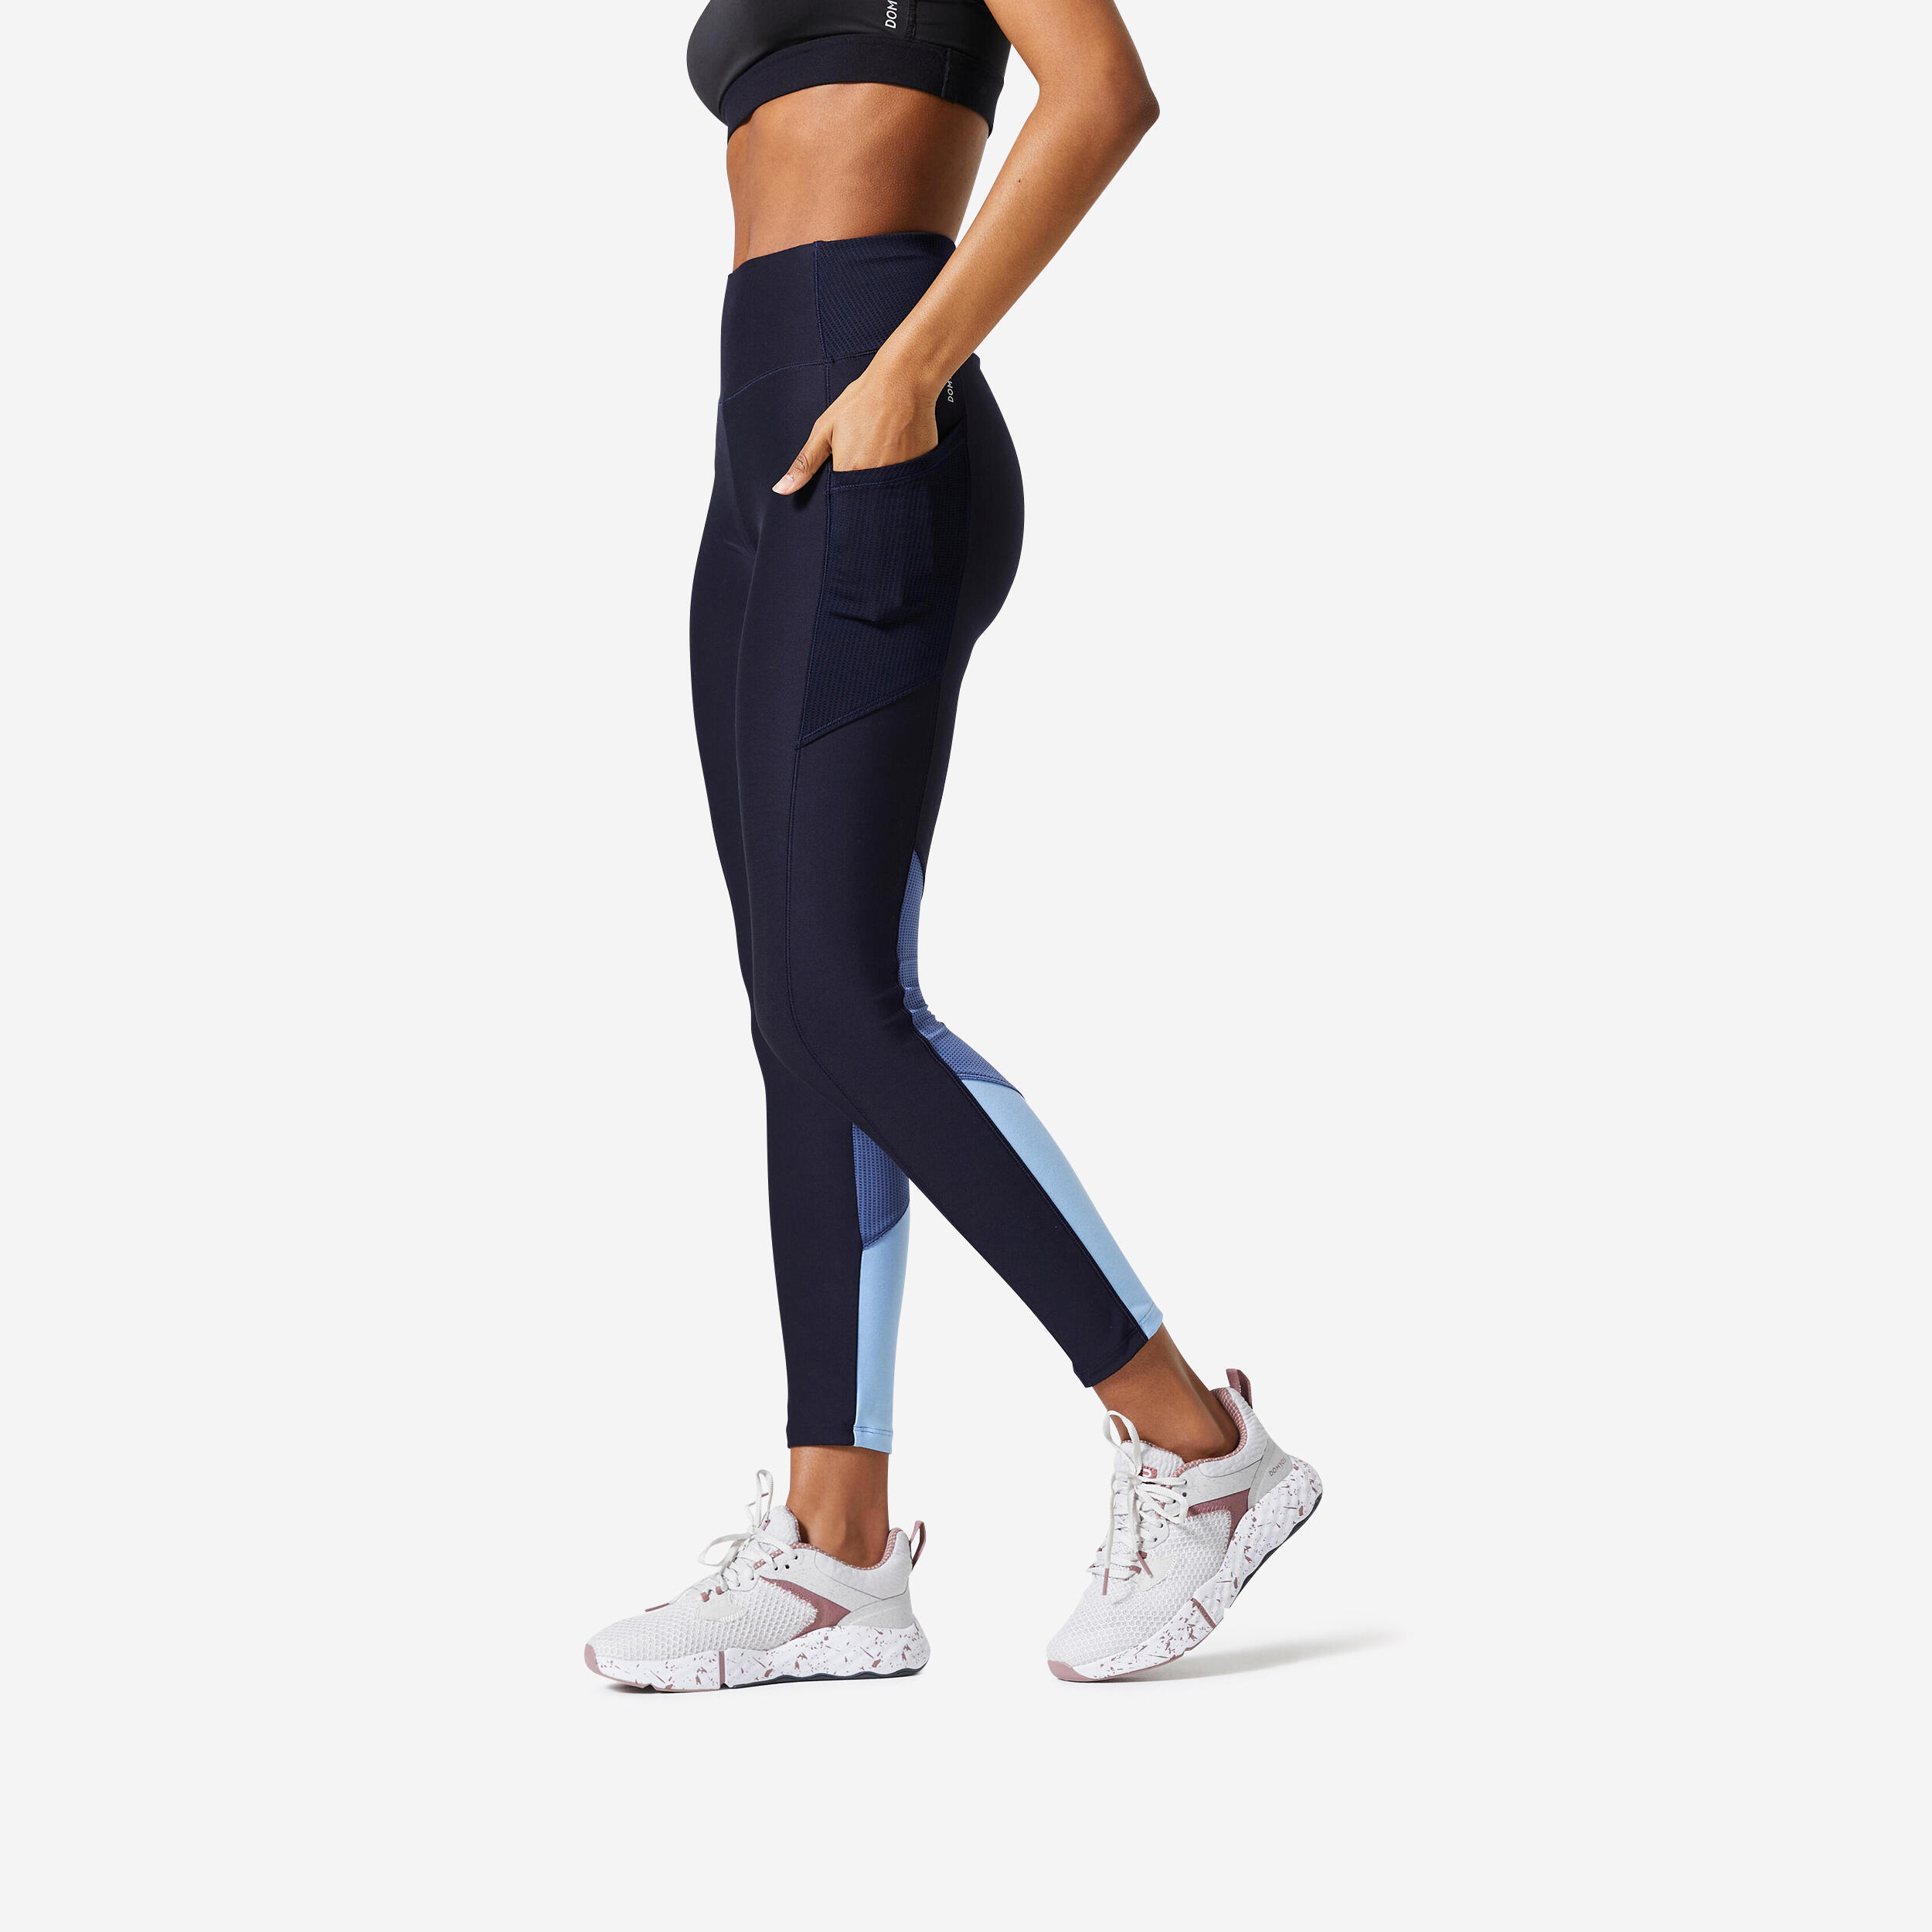 Women Tights for Running | Running Pants For Women | PYNRS – PYNRS  Performance Streetwear